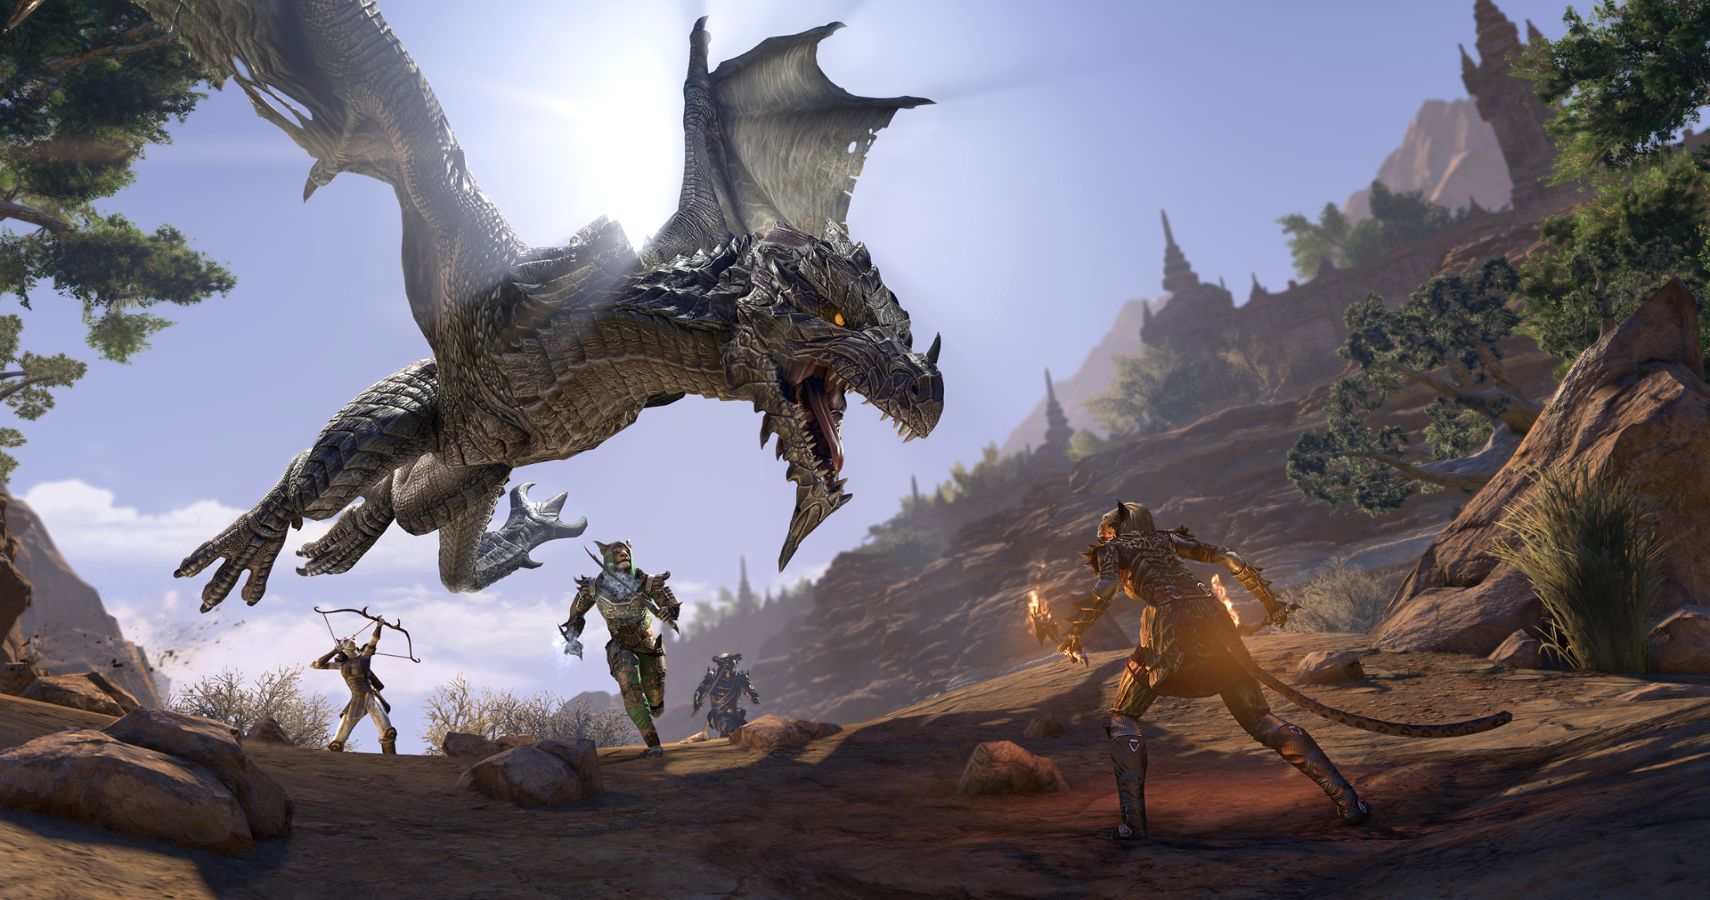 The Elder Scrolls Online Elsweyr Arrives With Early Access And Brings Dragons